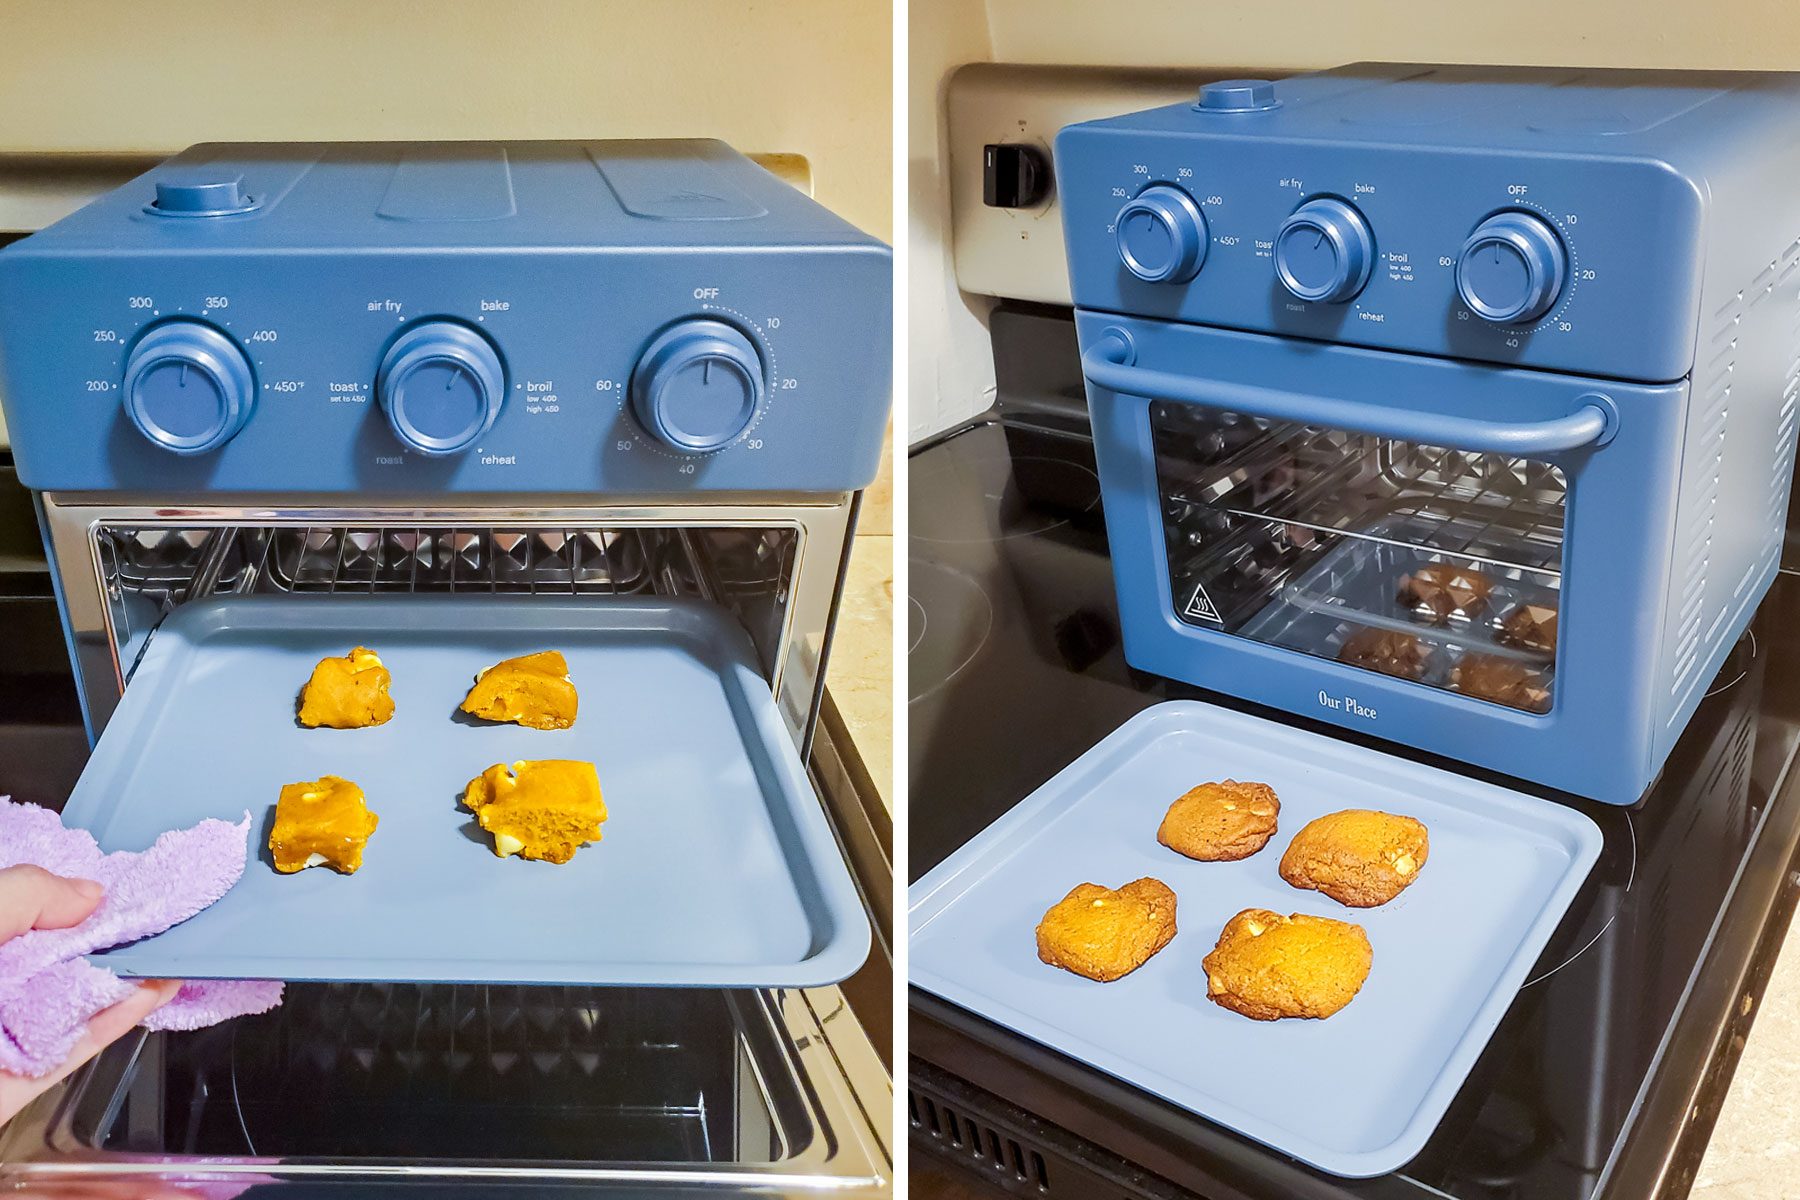 I Tried the $195 Our Place 6-in-1 Wonder Oven (Full Review)